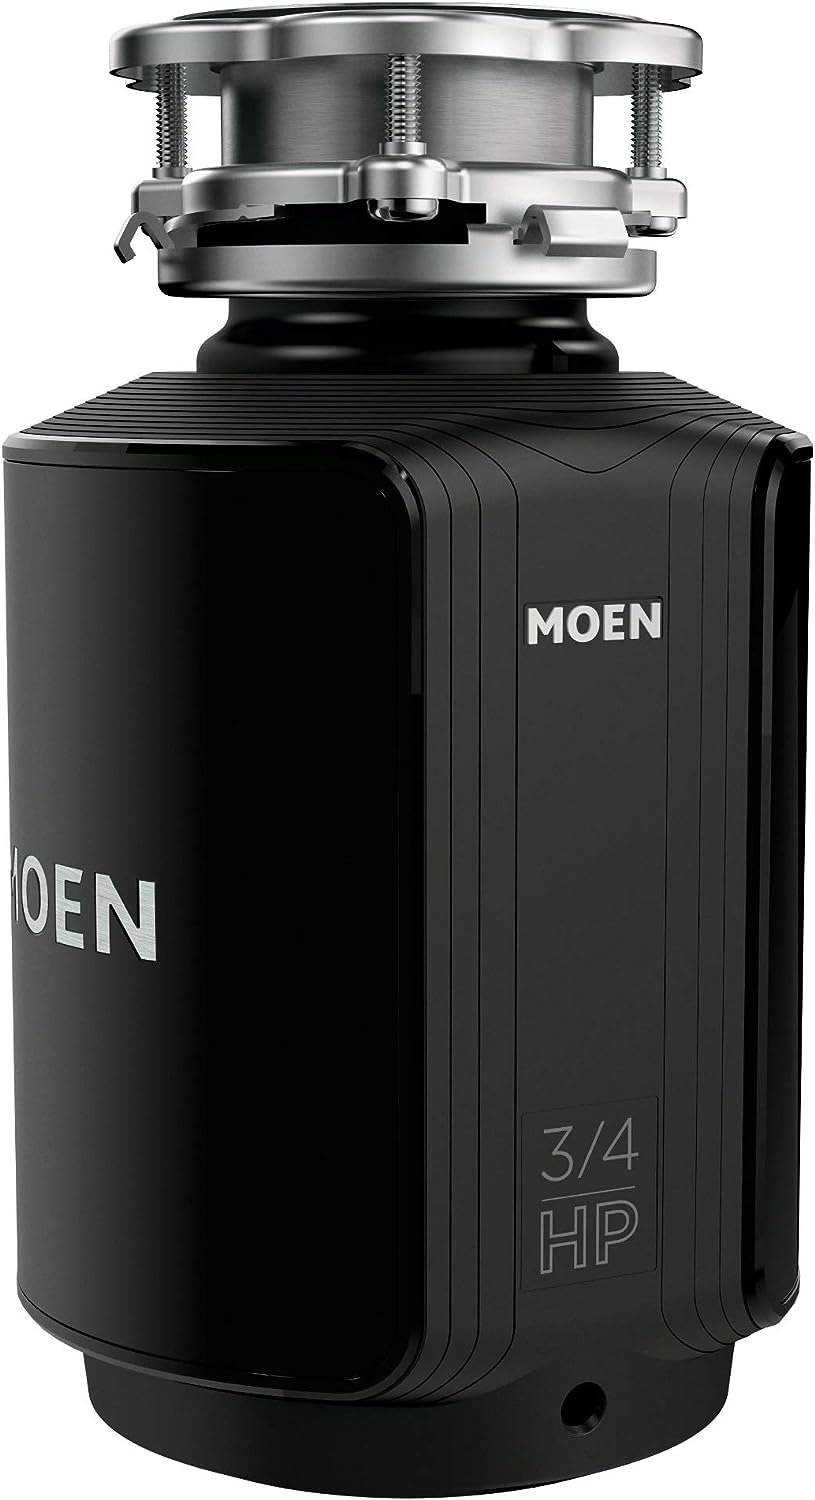 Moen Host Series 3/4 HP Continuous Feed Garbage [...]